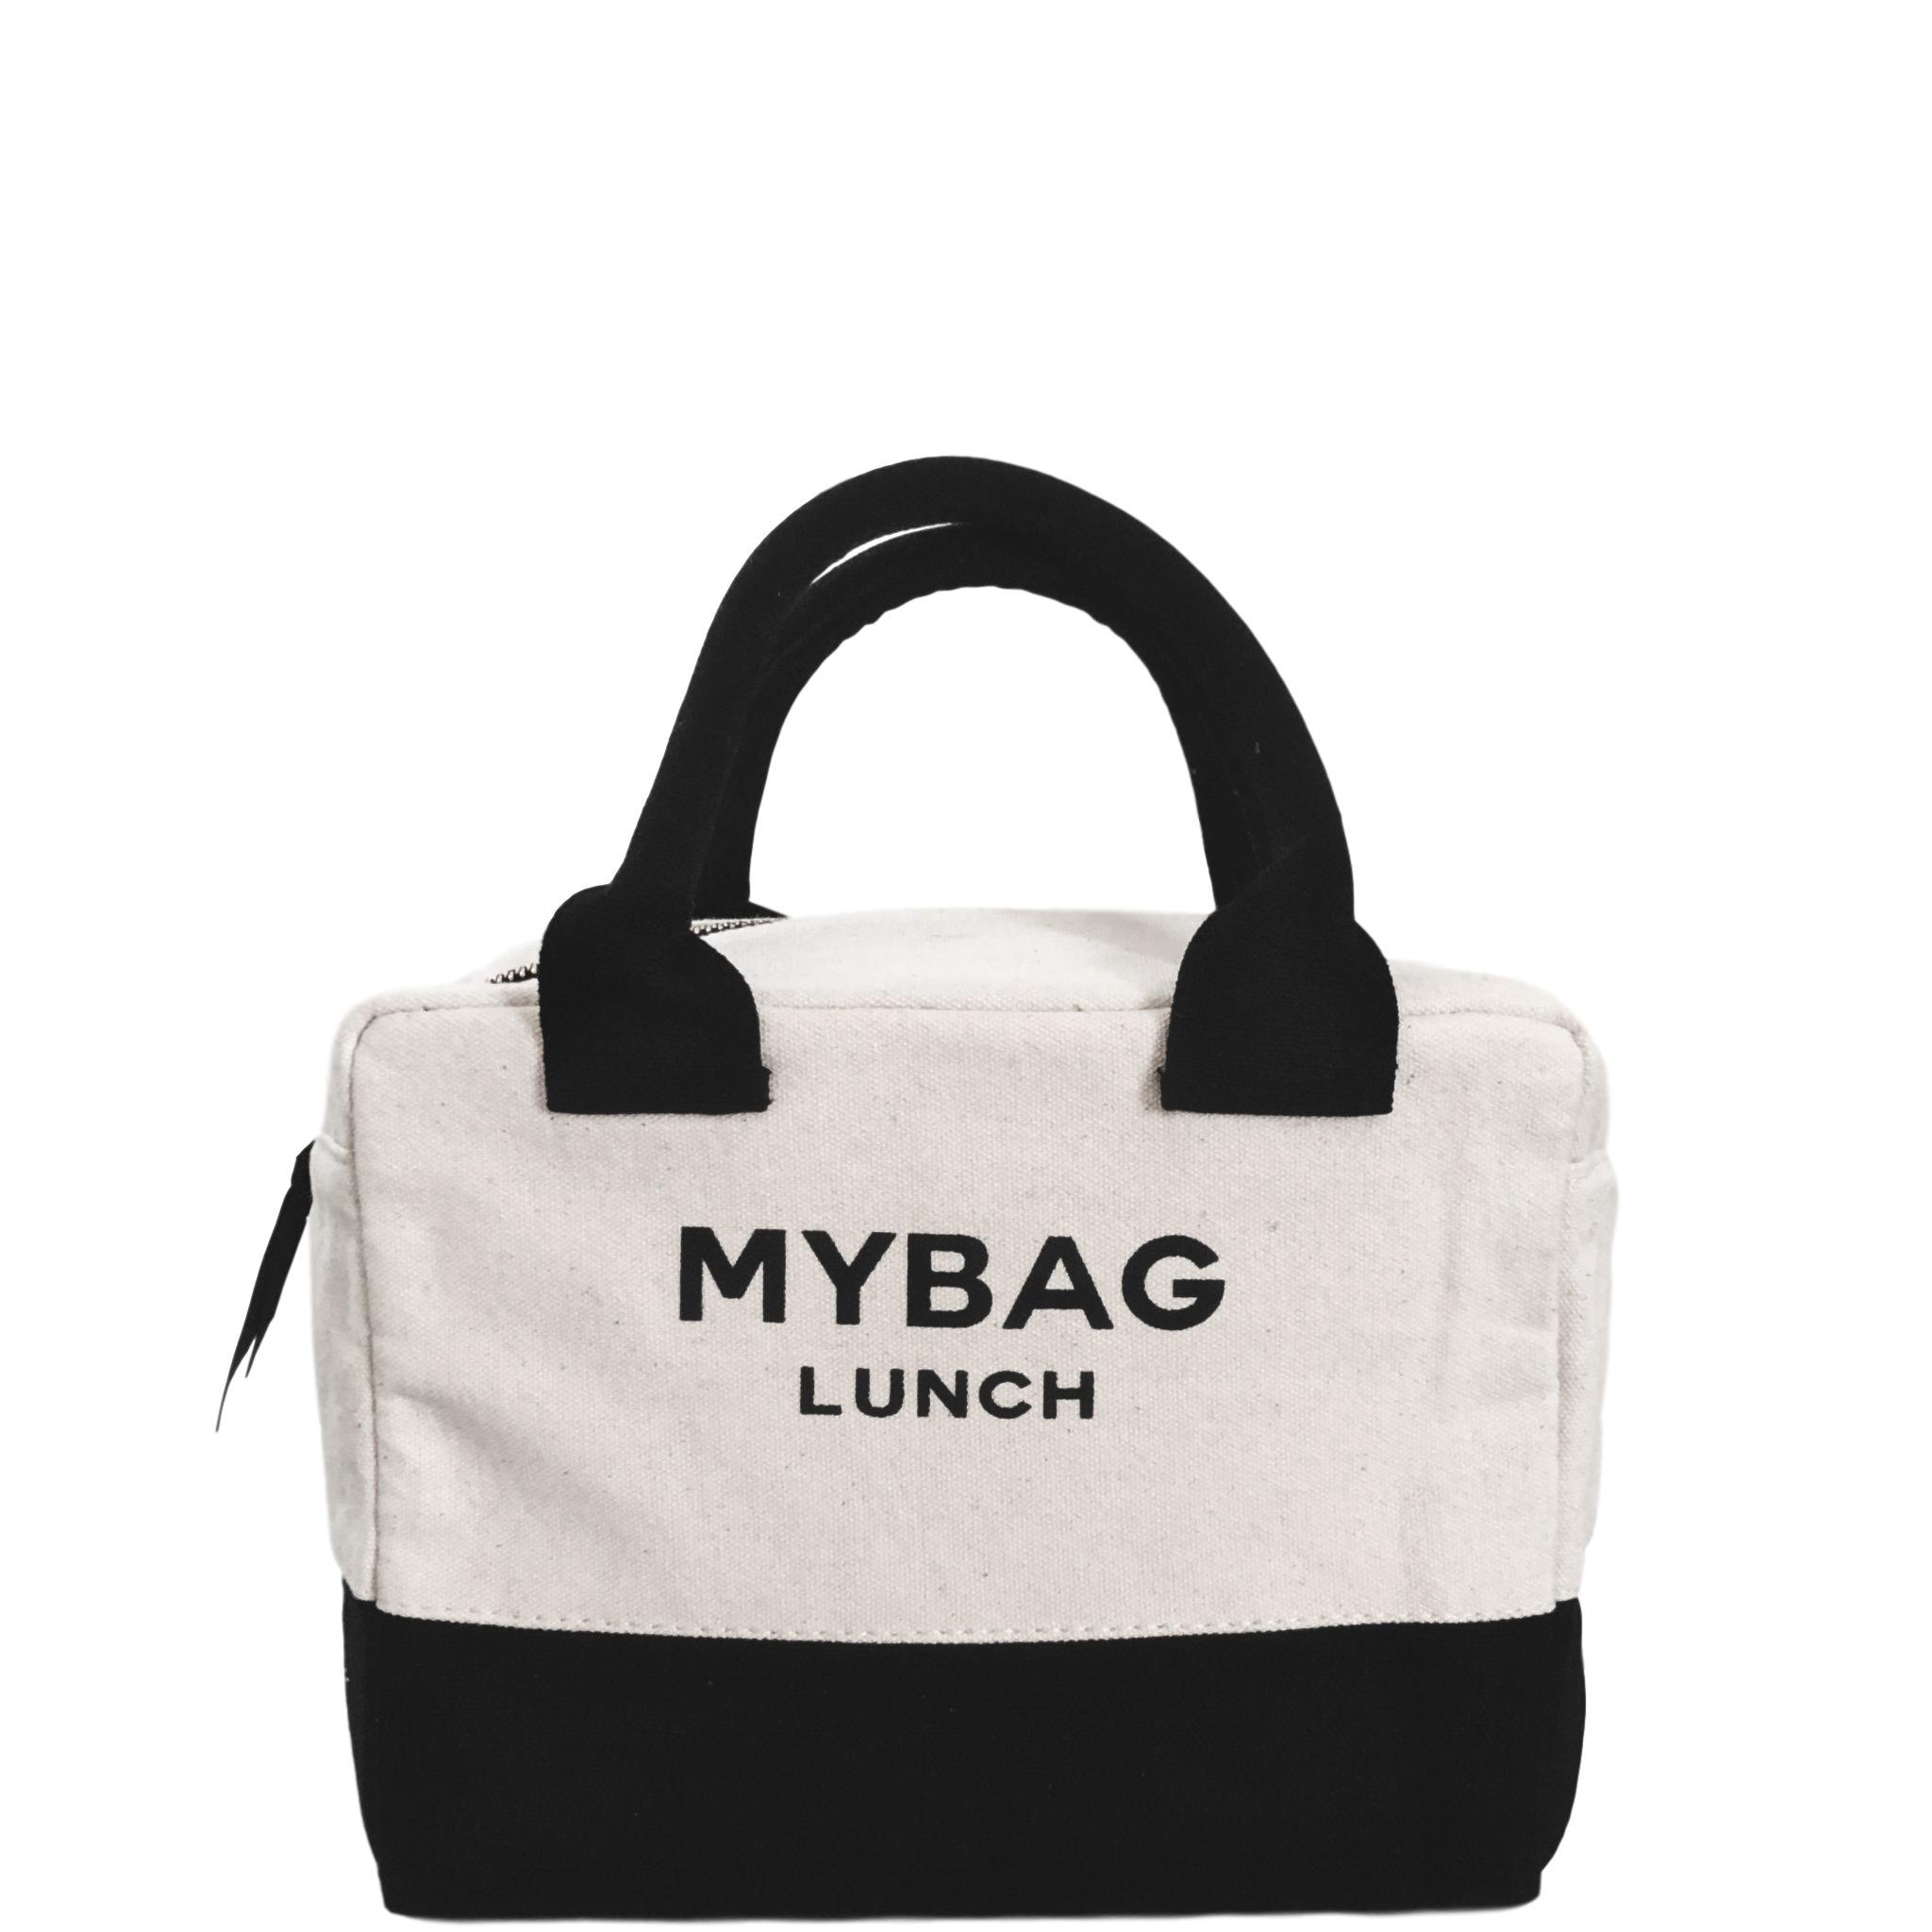 Lunch Bag Insulated Lunch Box Wide-Open Lunch Tote Bag for College